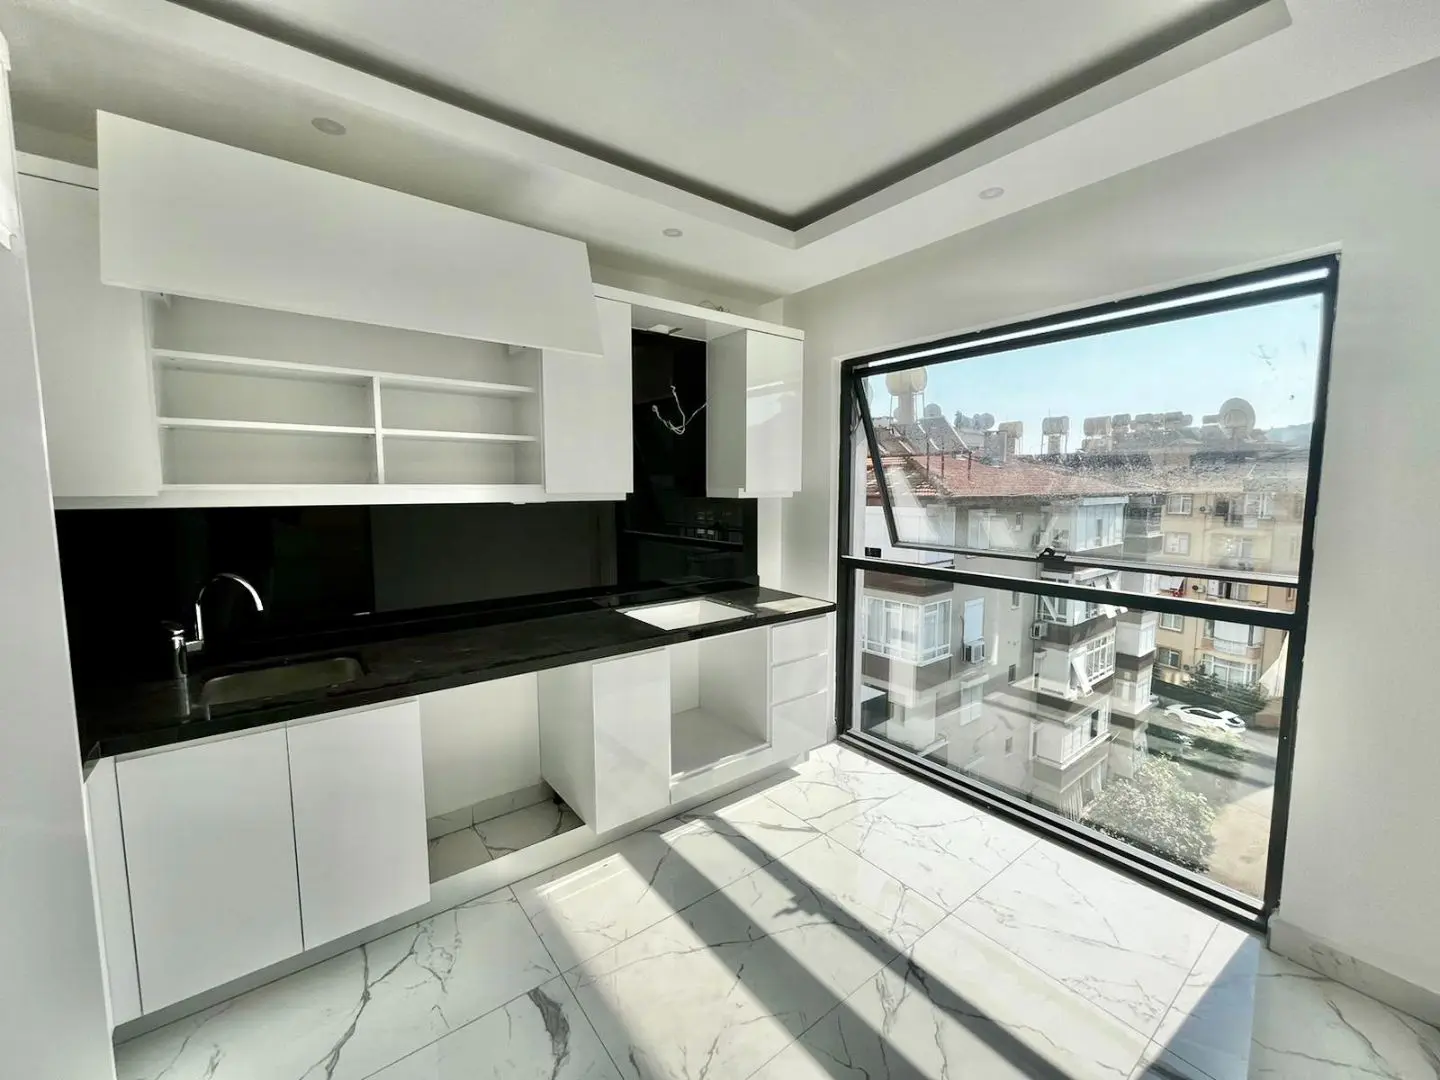 NEW 3+1 DUPLEX FLAT IN A PERFECT LOCATION IN ALANYA